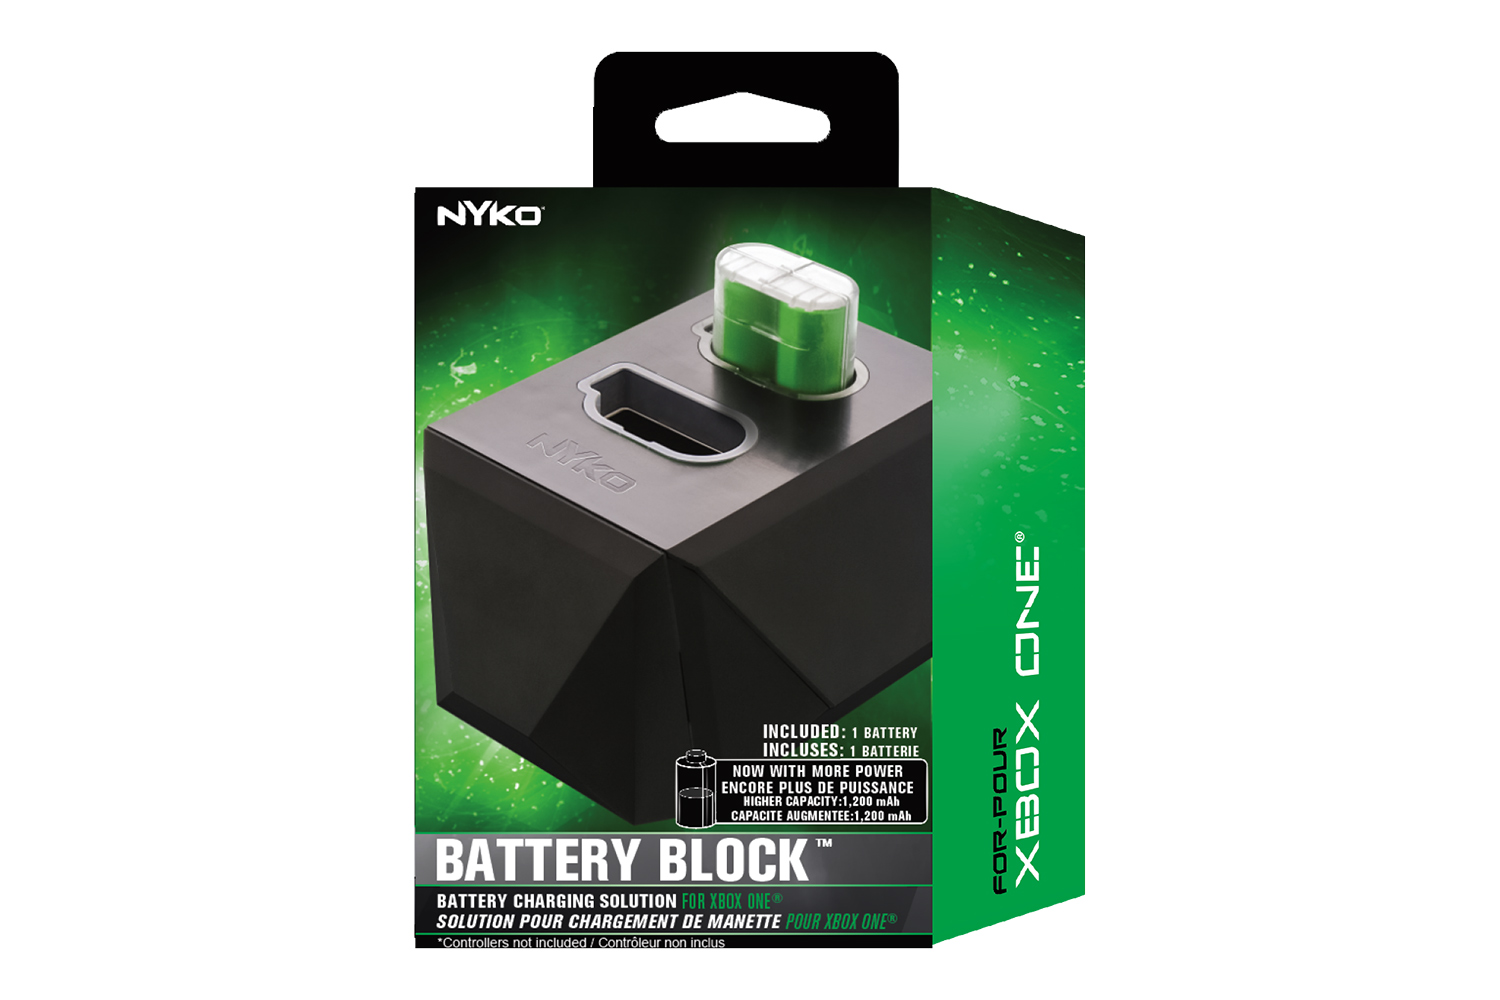 Battery Block for Xbox One